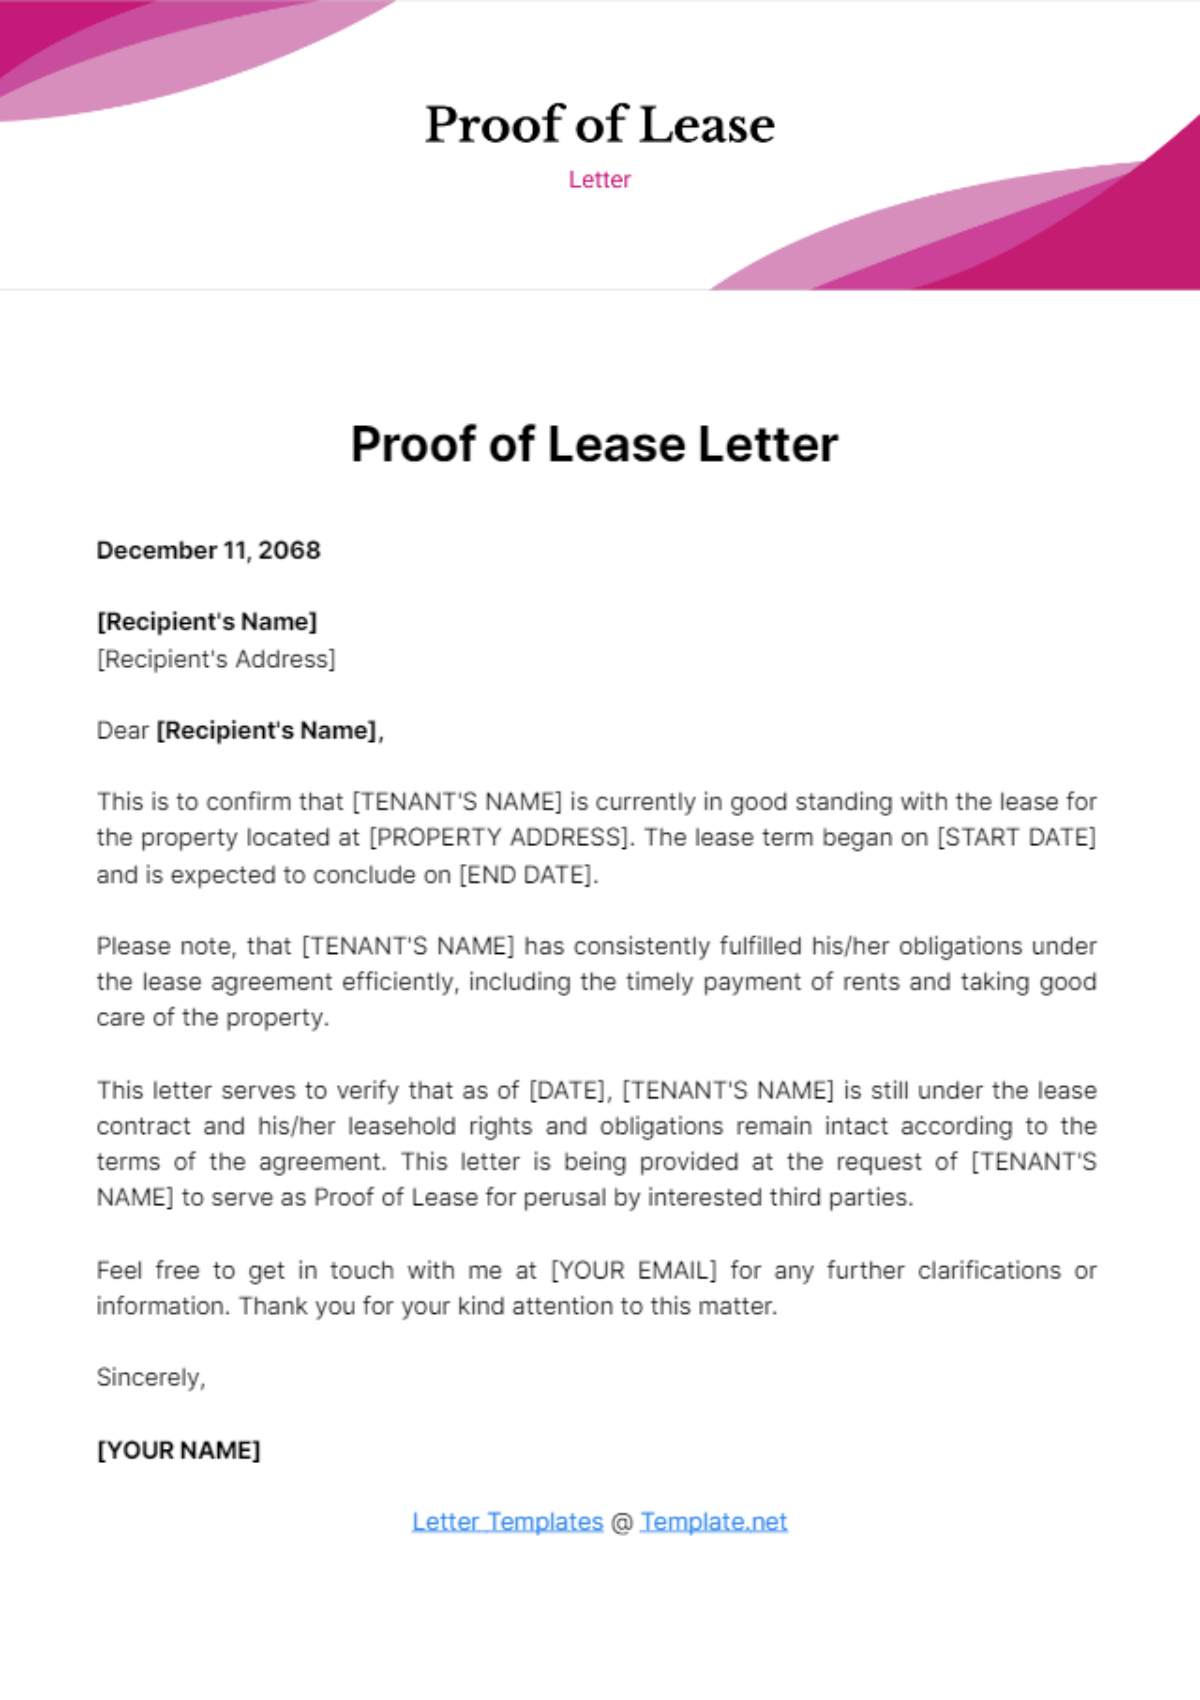 Proof of Lease Letter Template